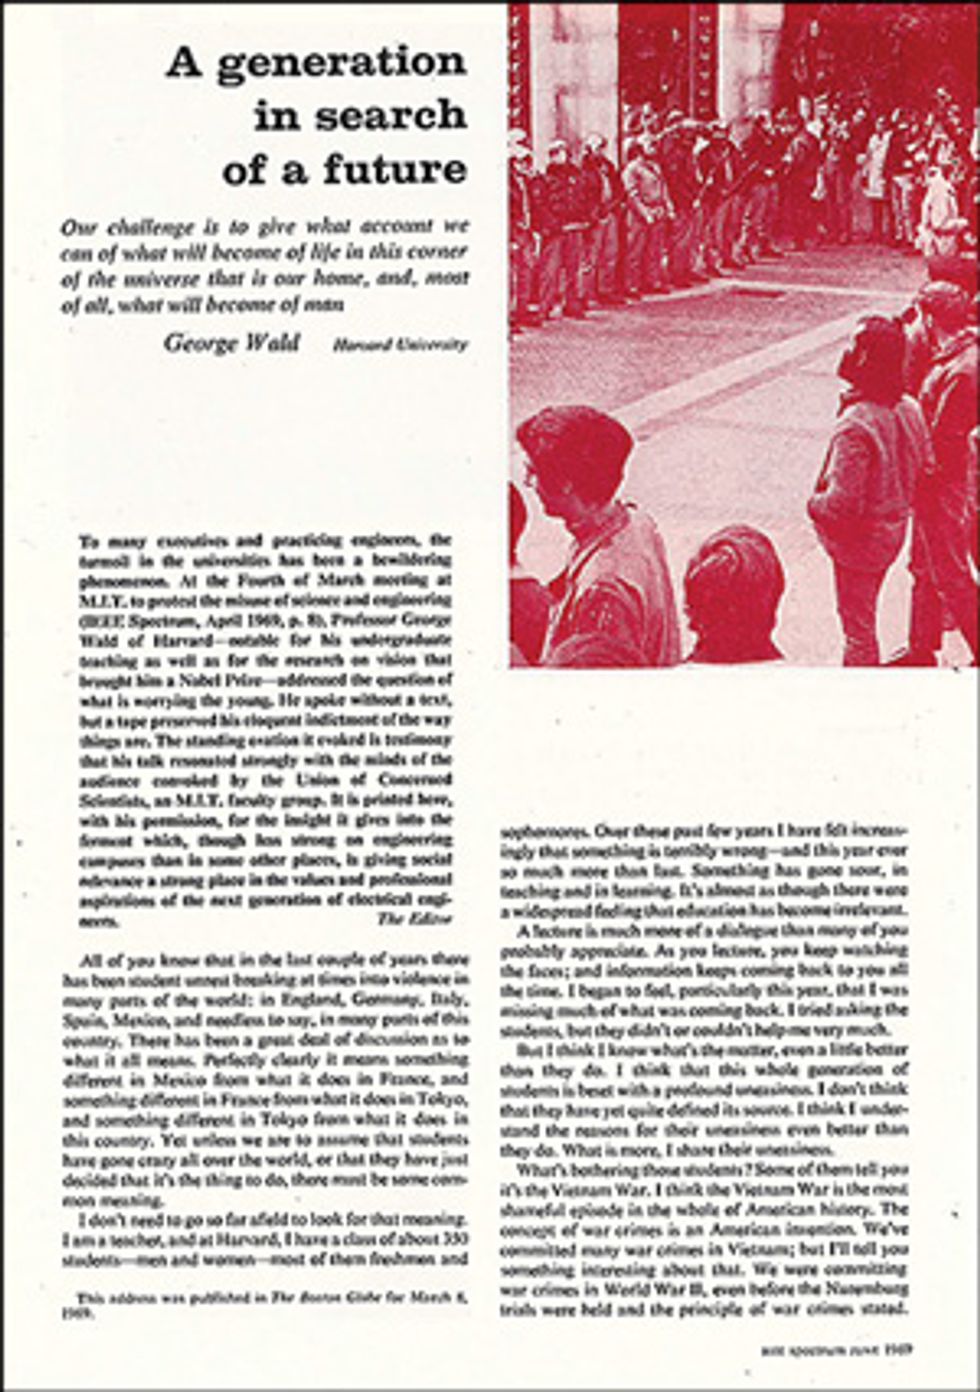 scan of the 1969 article from IEEE Spectrum magazine